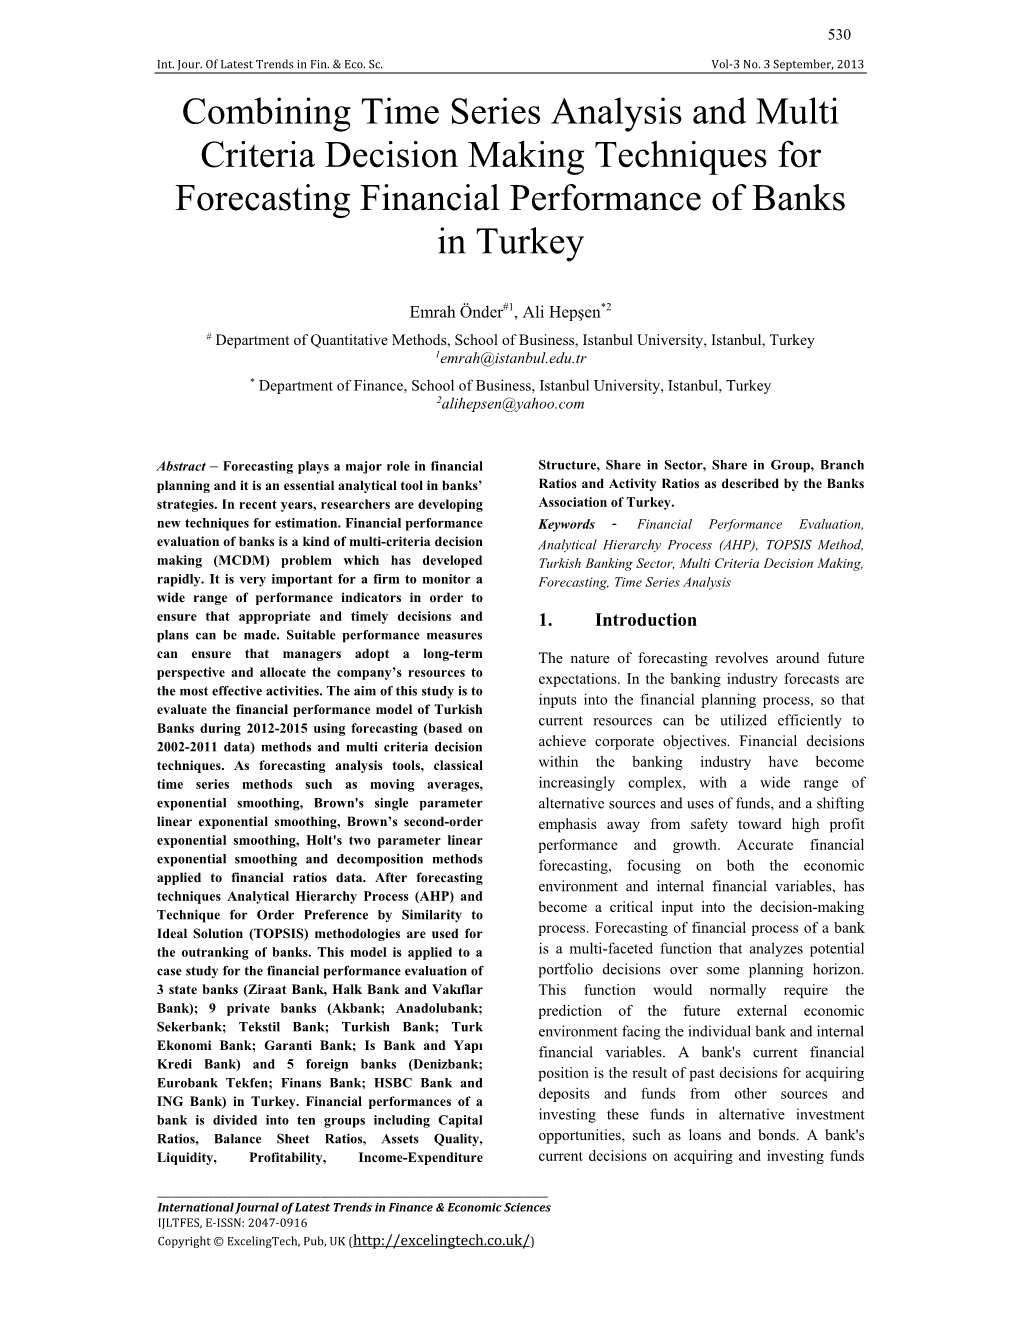 Combining Time Series Analysis and Multi Criteria Decision Making Techniques for Forecasting Financial Performance of Banks in Turkey